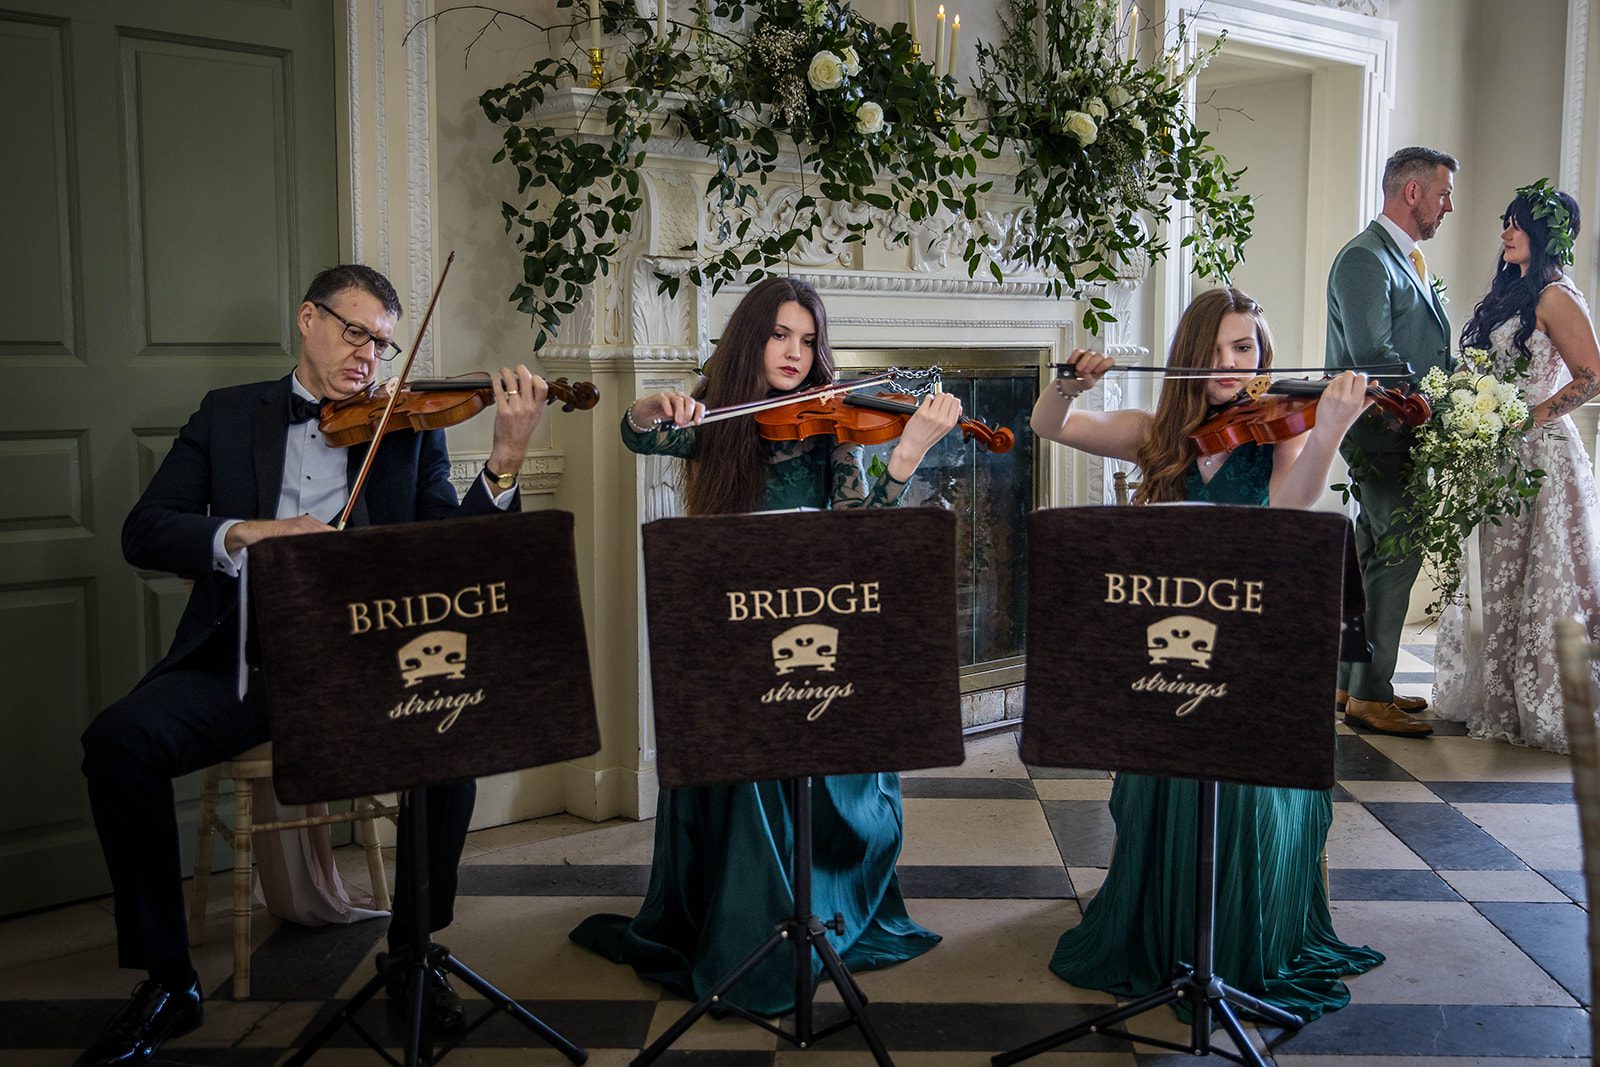 Your wedding ceremony songs may include a string quartet. This image shows 3 violinists playing in front of a couple getting married. 